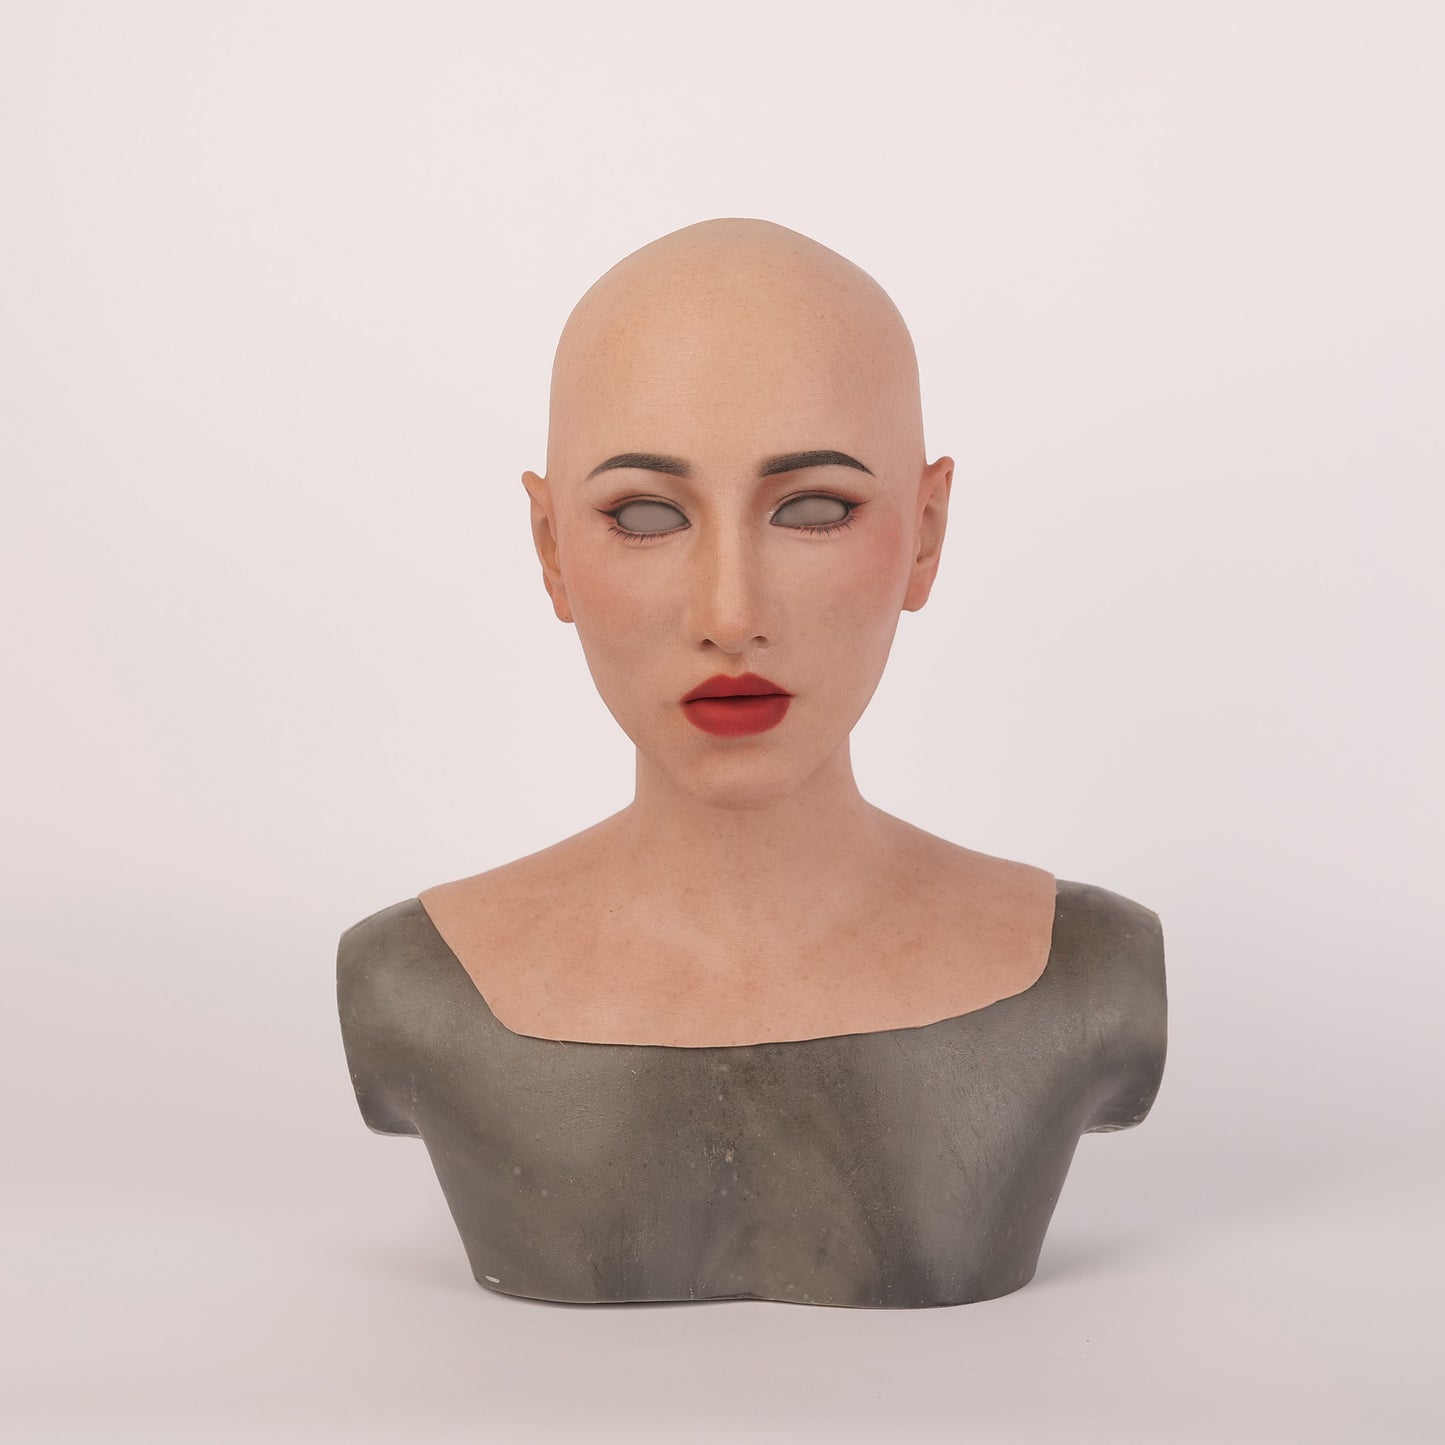 Molly 2 Silicone Mask Beauty Version